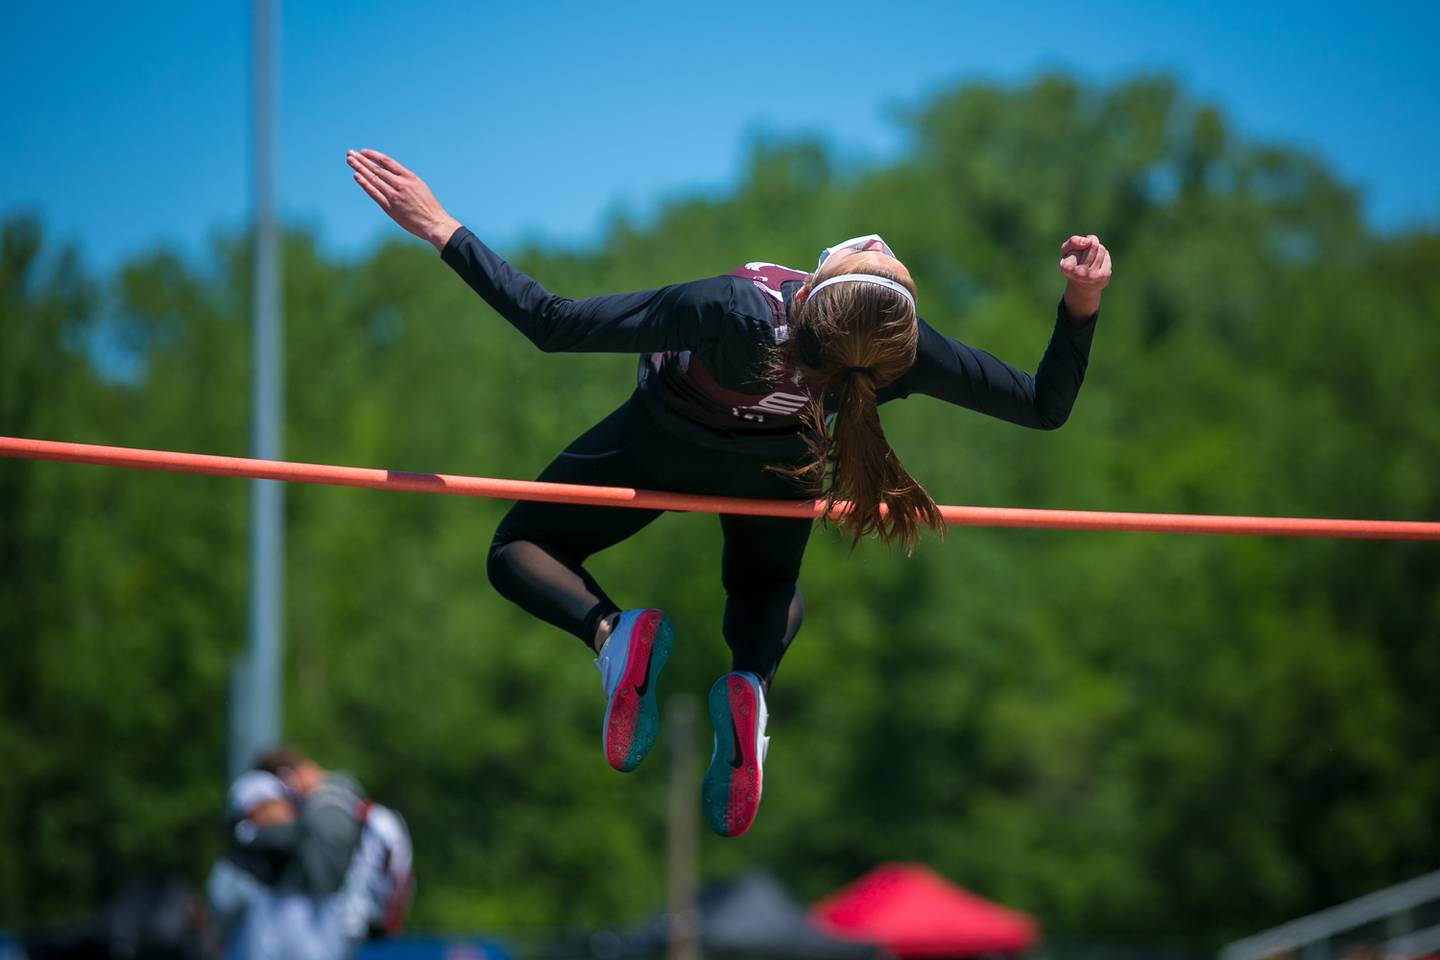 Prairie Ridge's Rylee Lydon clears the high jump bar to win the 2021 Fox Valley Conference title on May 29, 2021 in Carpentersville.